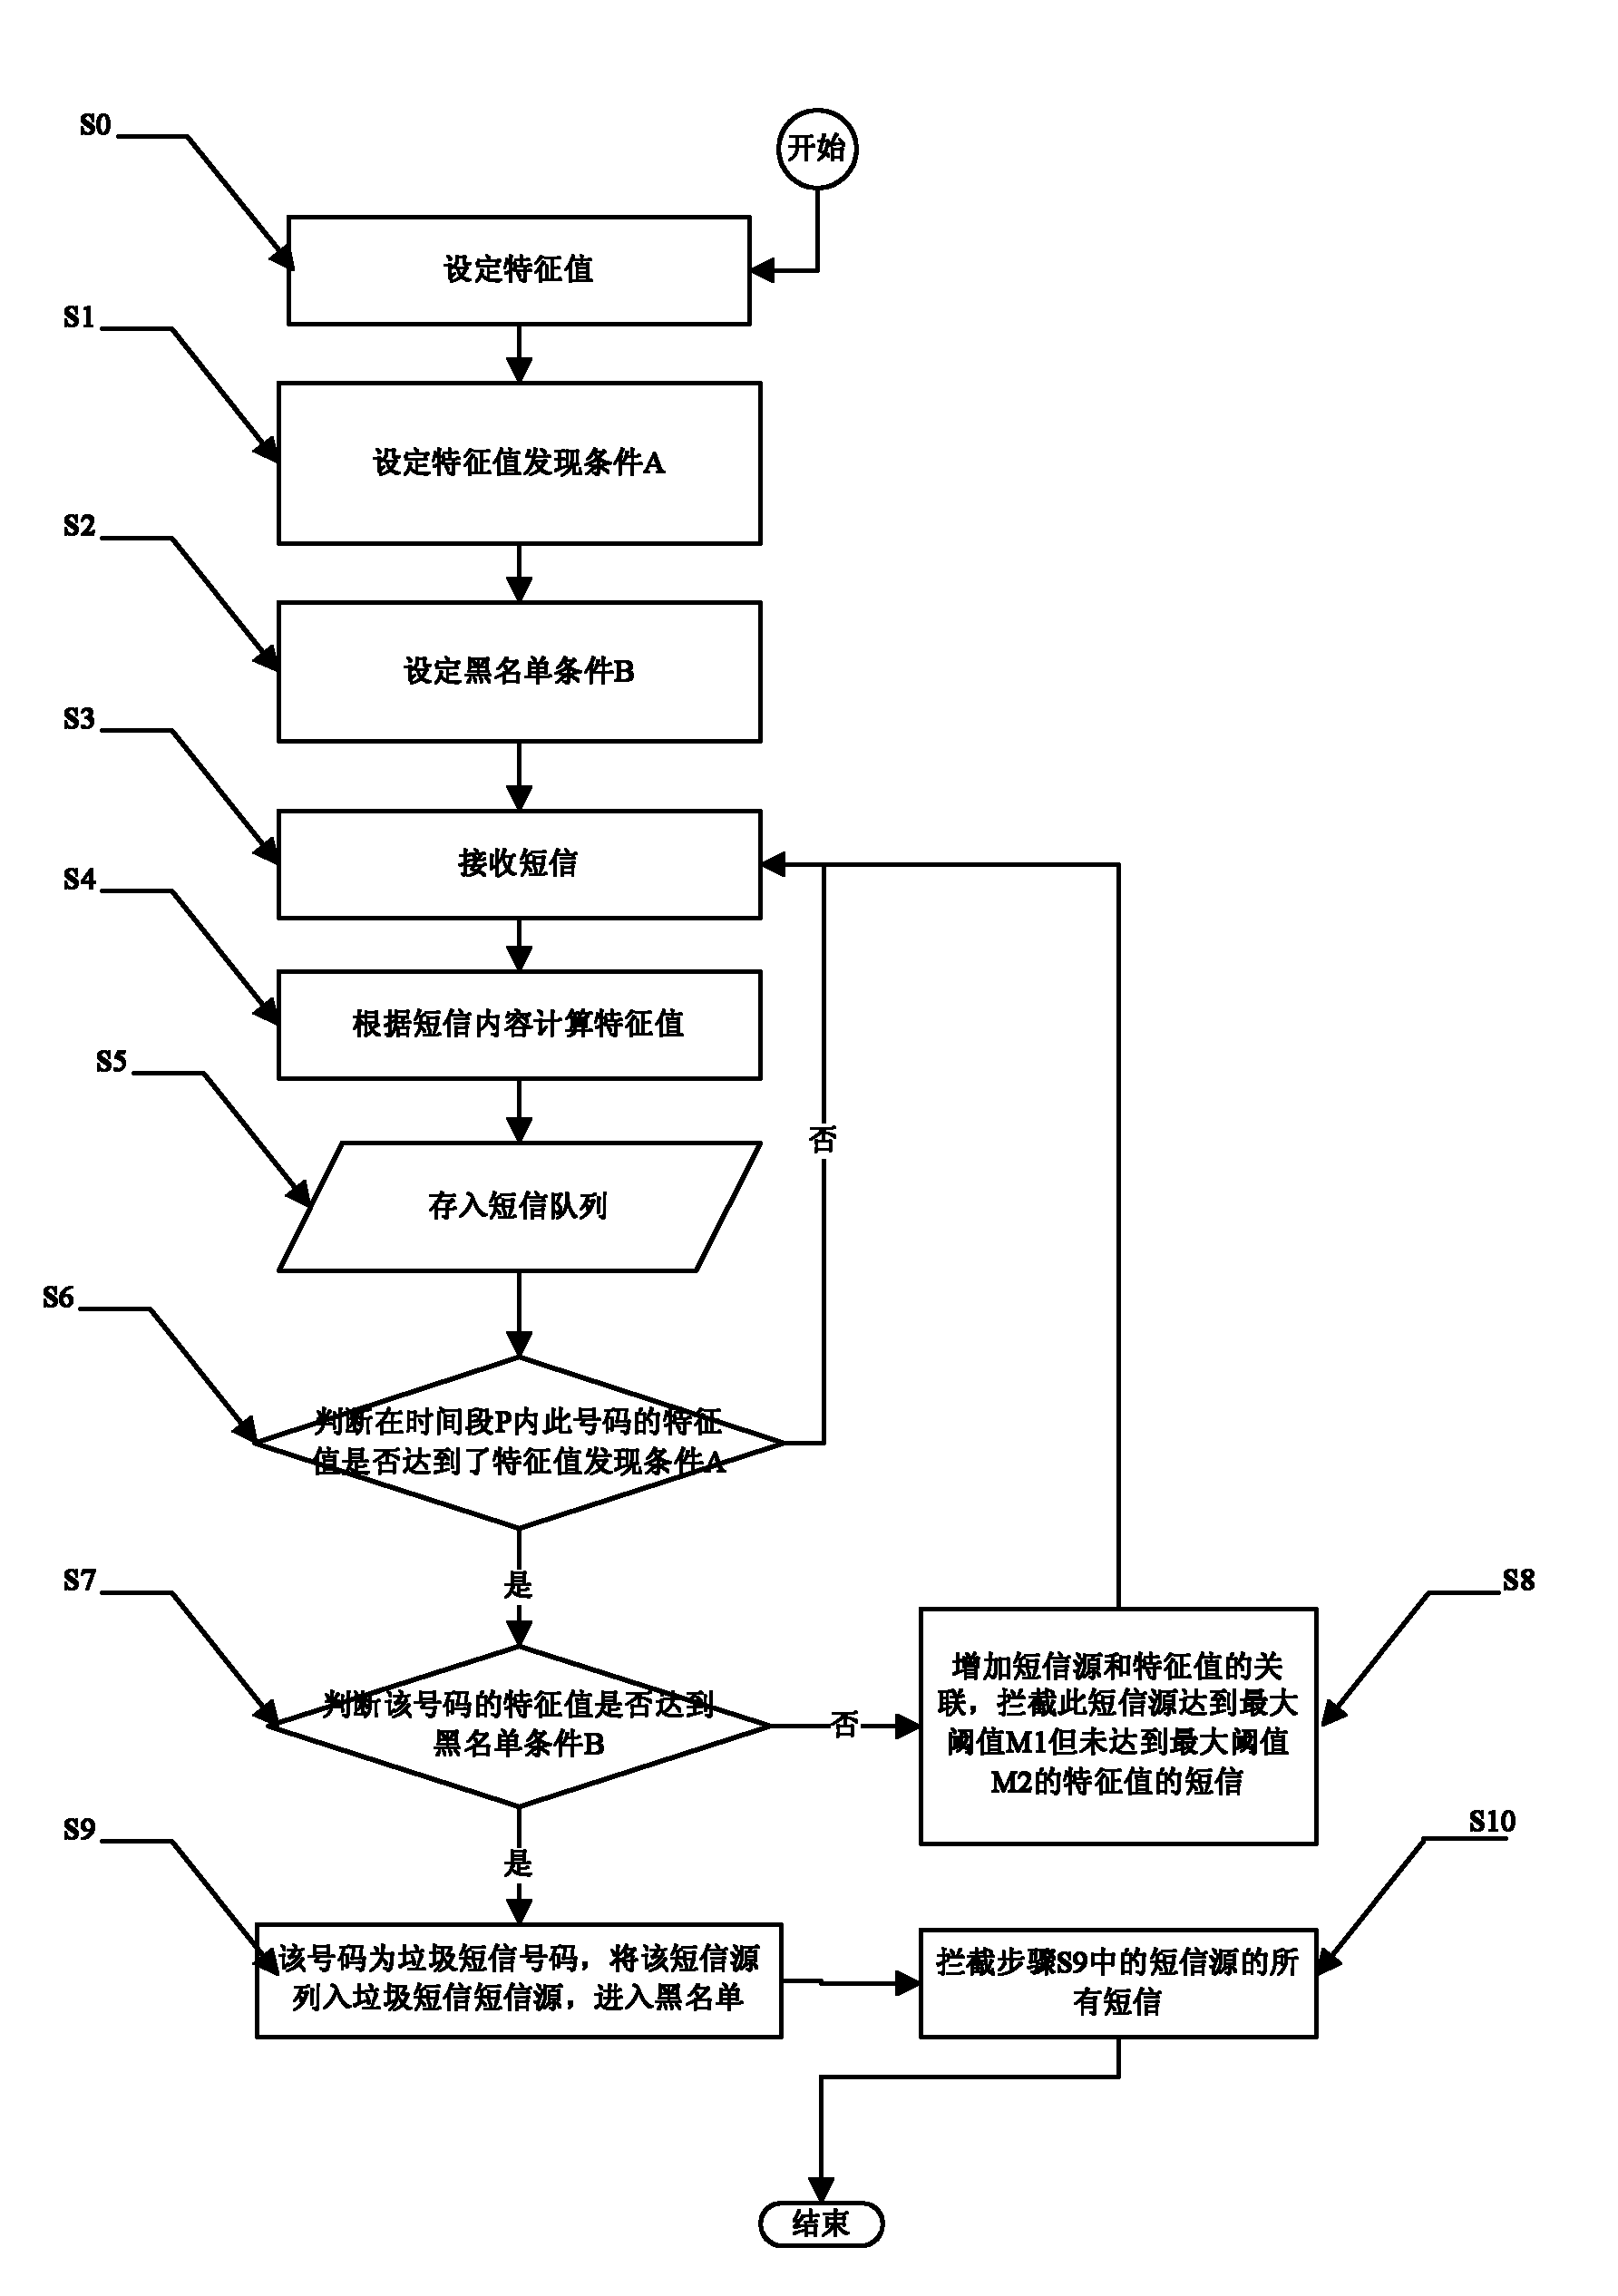 Method and system for identifying spam message sources by combining message contents and transmission frequency